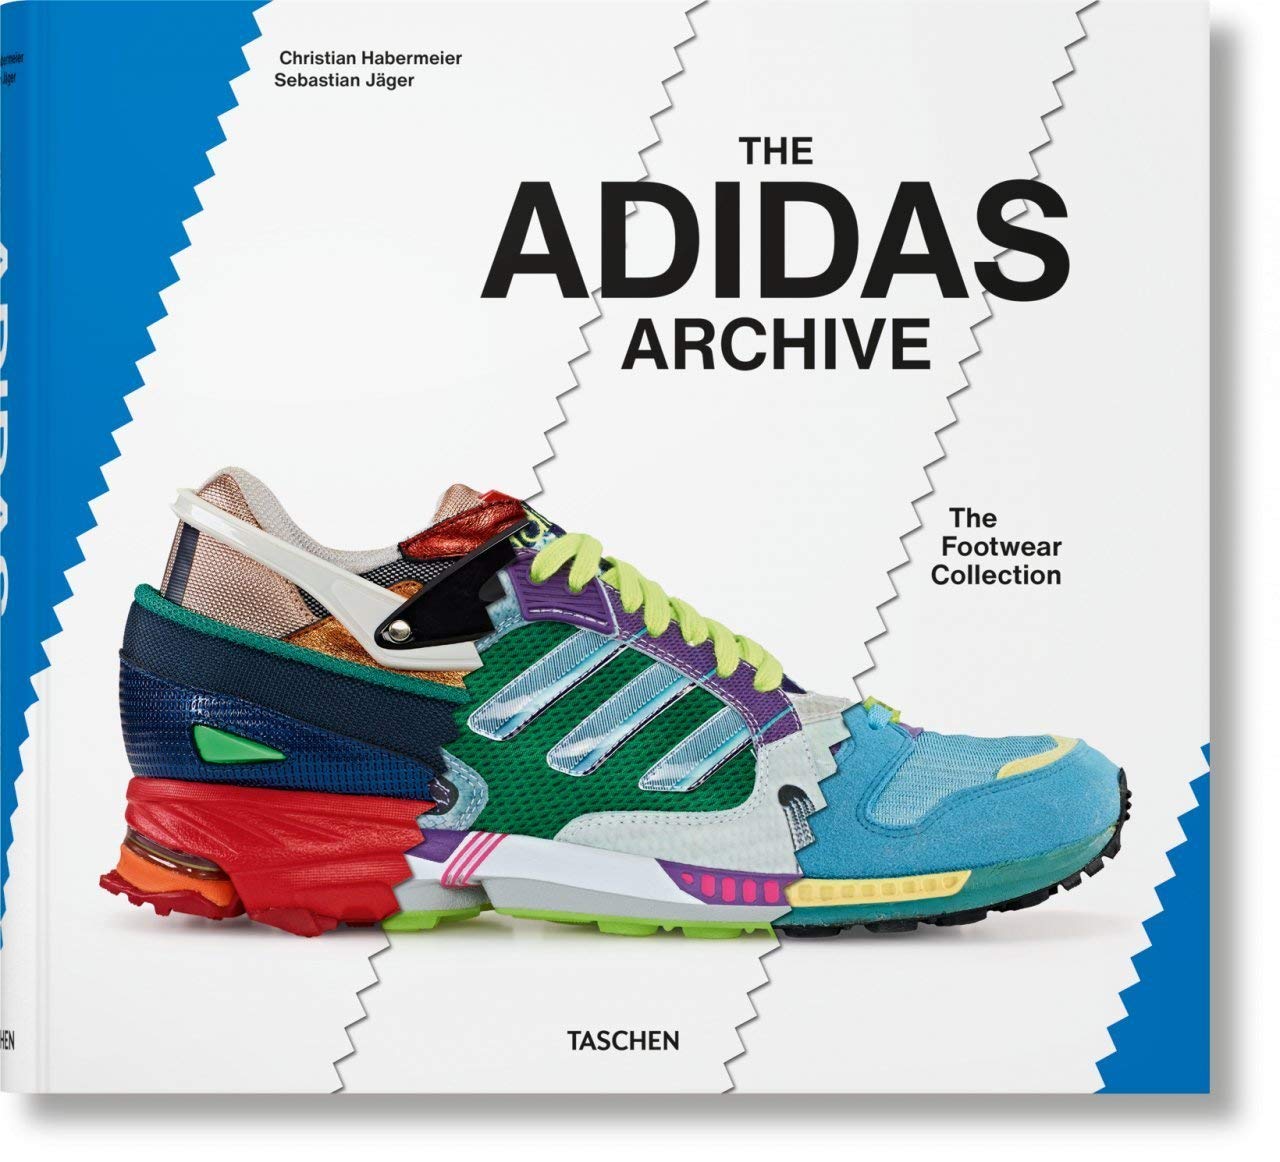 Distinguish Grandpa poultry Adidas Archives. The Footwear Collection